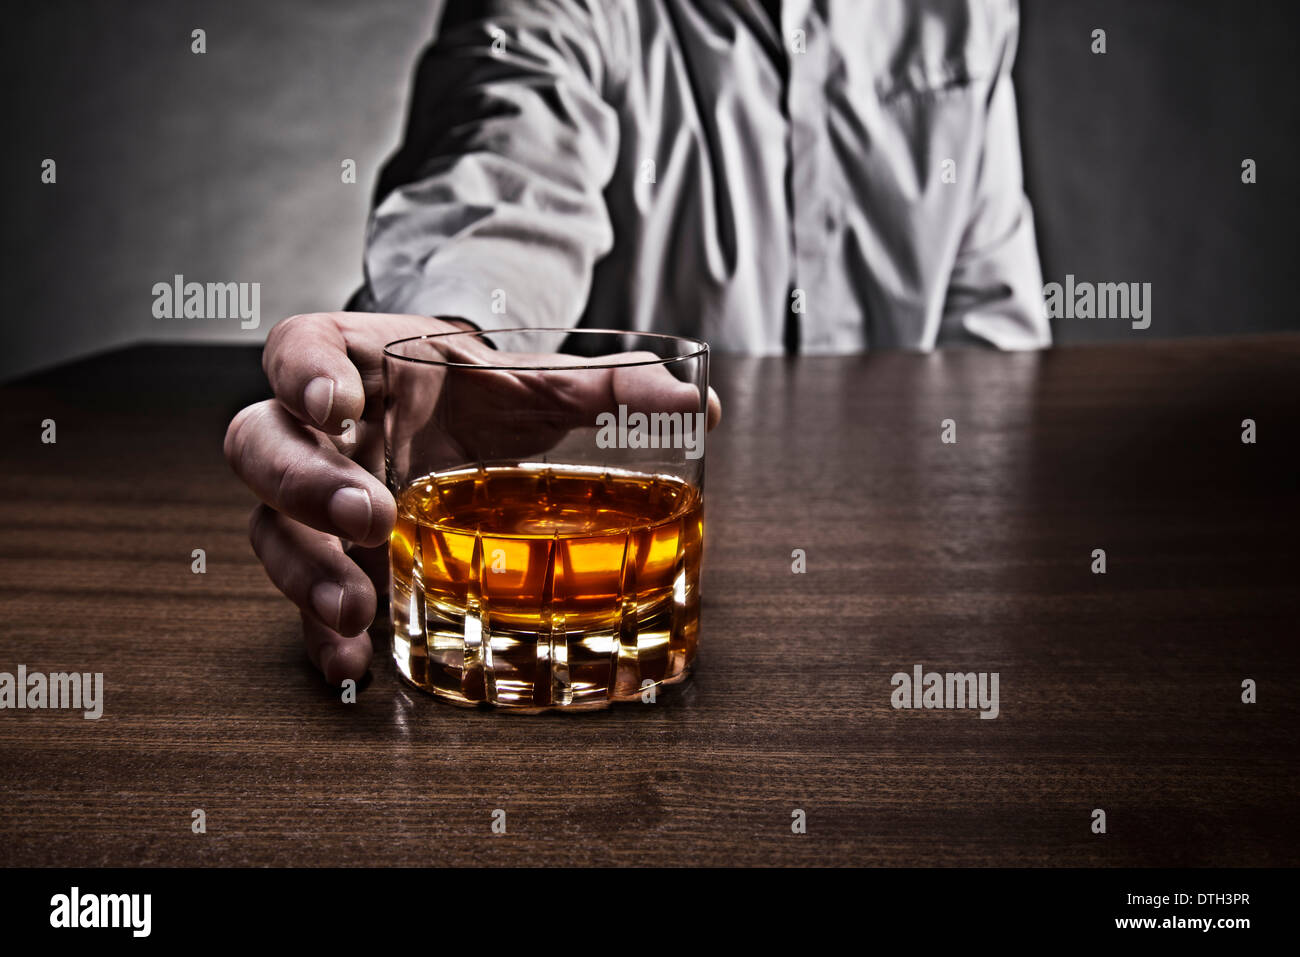 Hand of a man reaching for a glass of whiskey, which stands on a table. Stock Photo